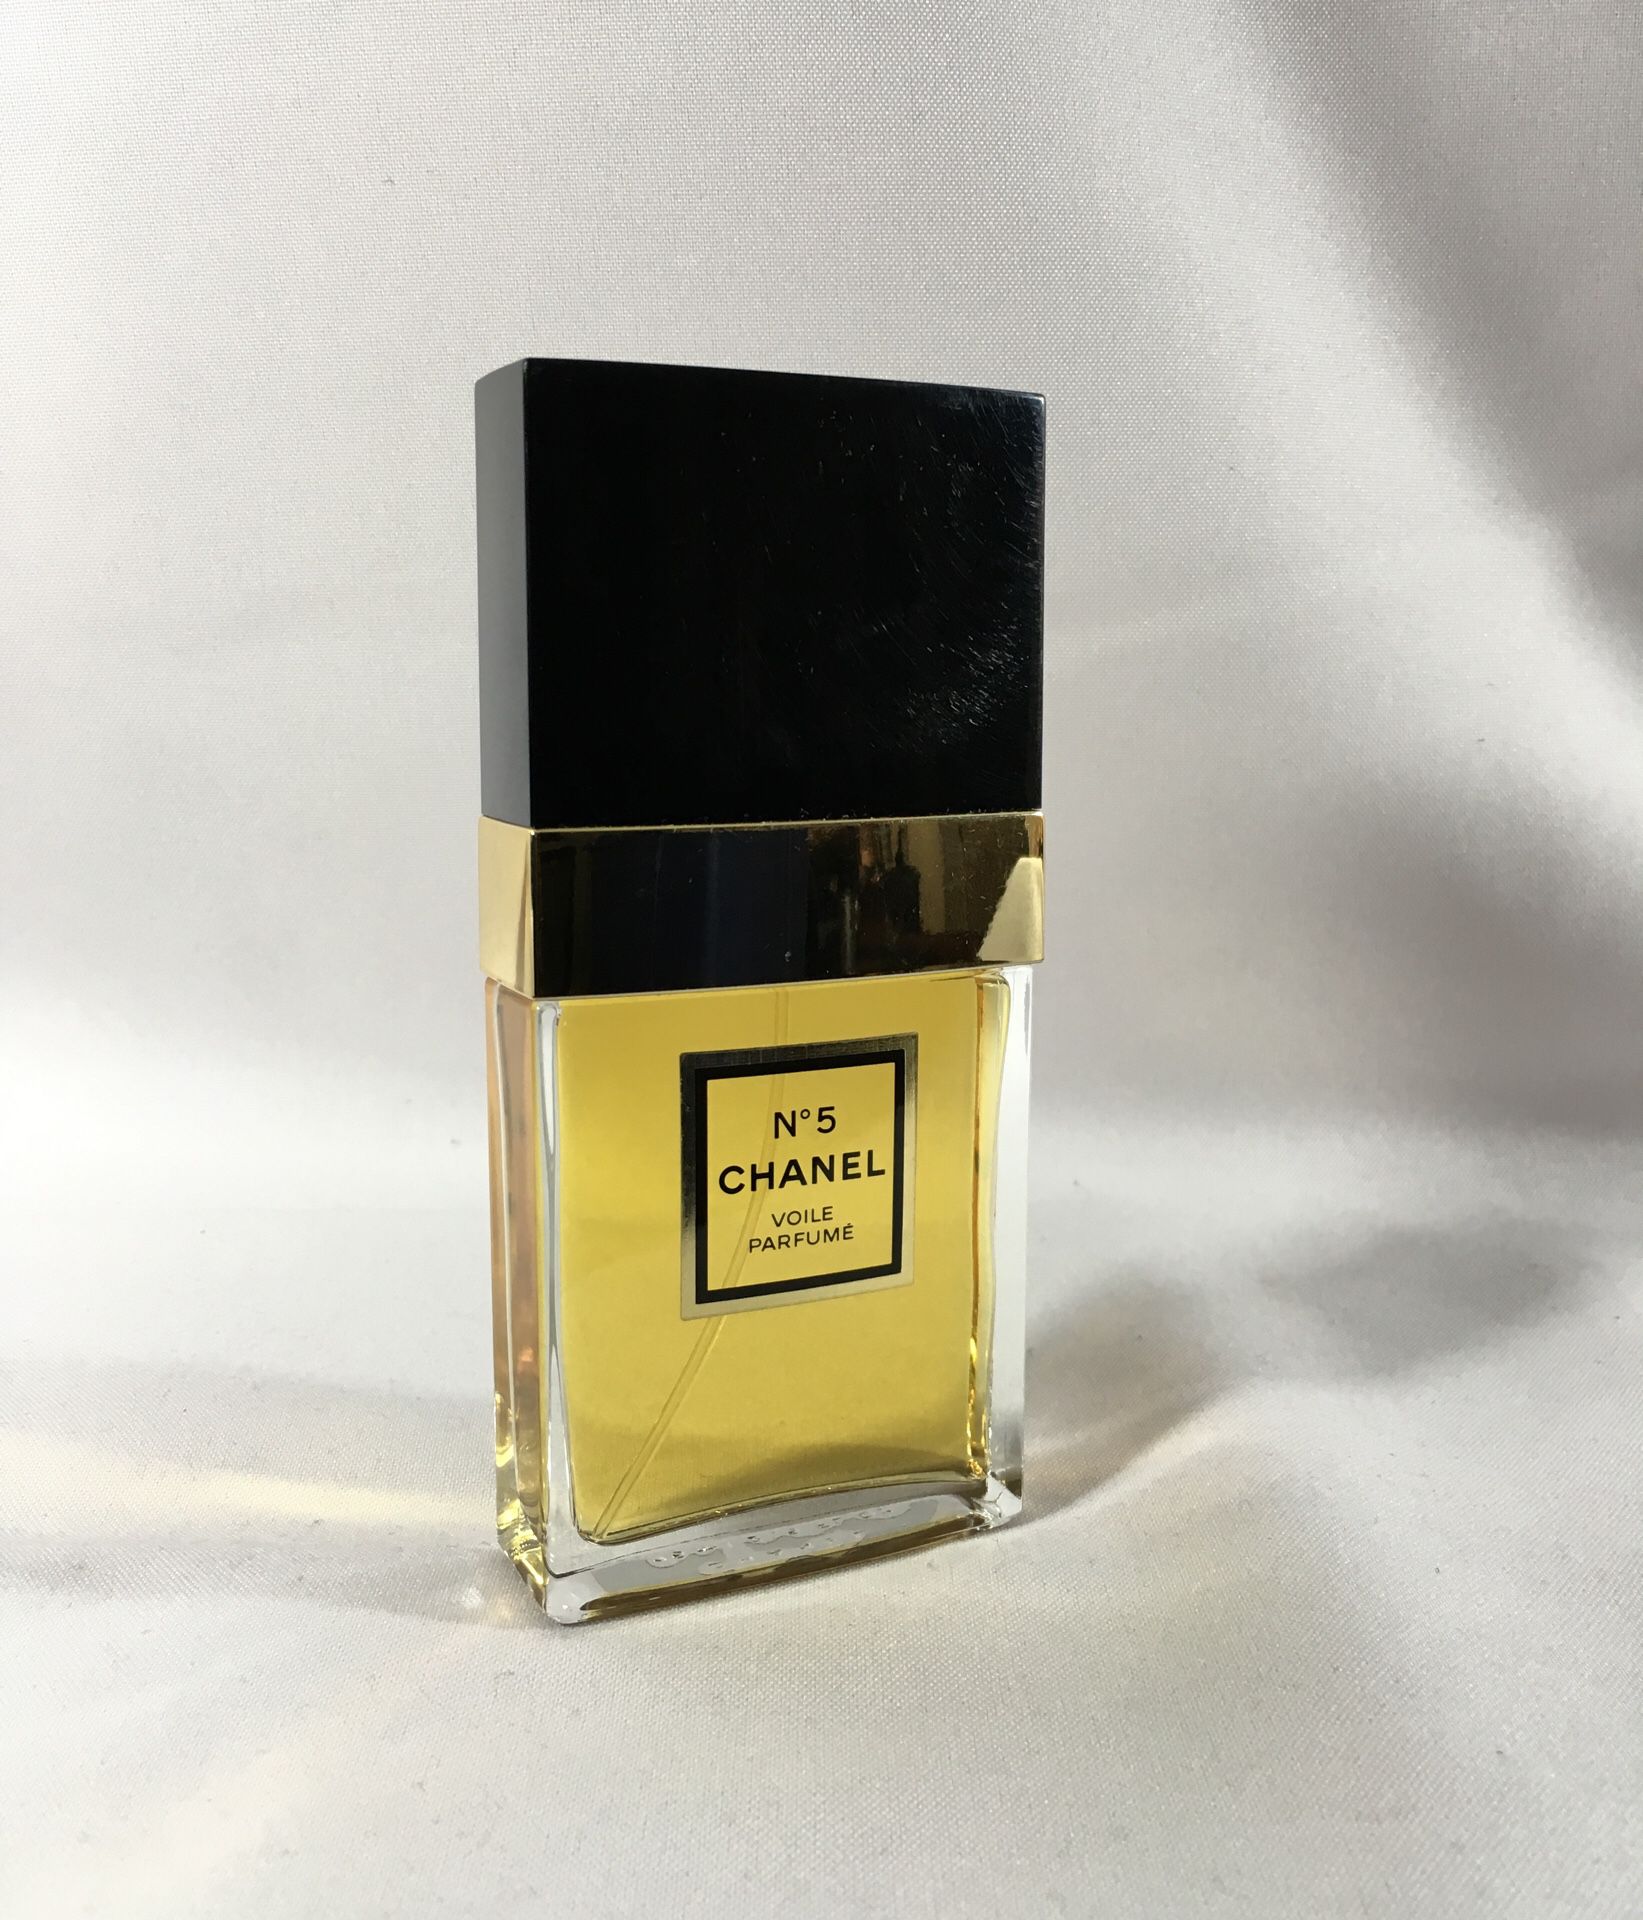 CHANEL No 5 “NEW” Voile Perfume Refreshing Body Mist 2.5 fl oz 75ml NEW  Without Box for Sale in Fresno, CA - OfferUp